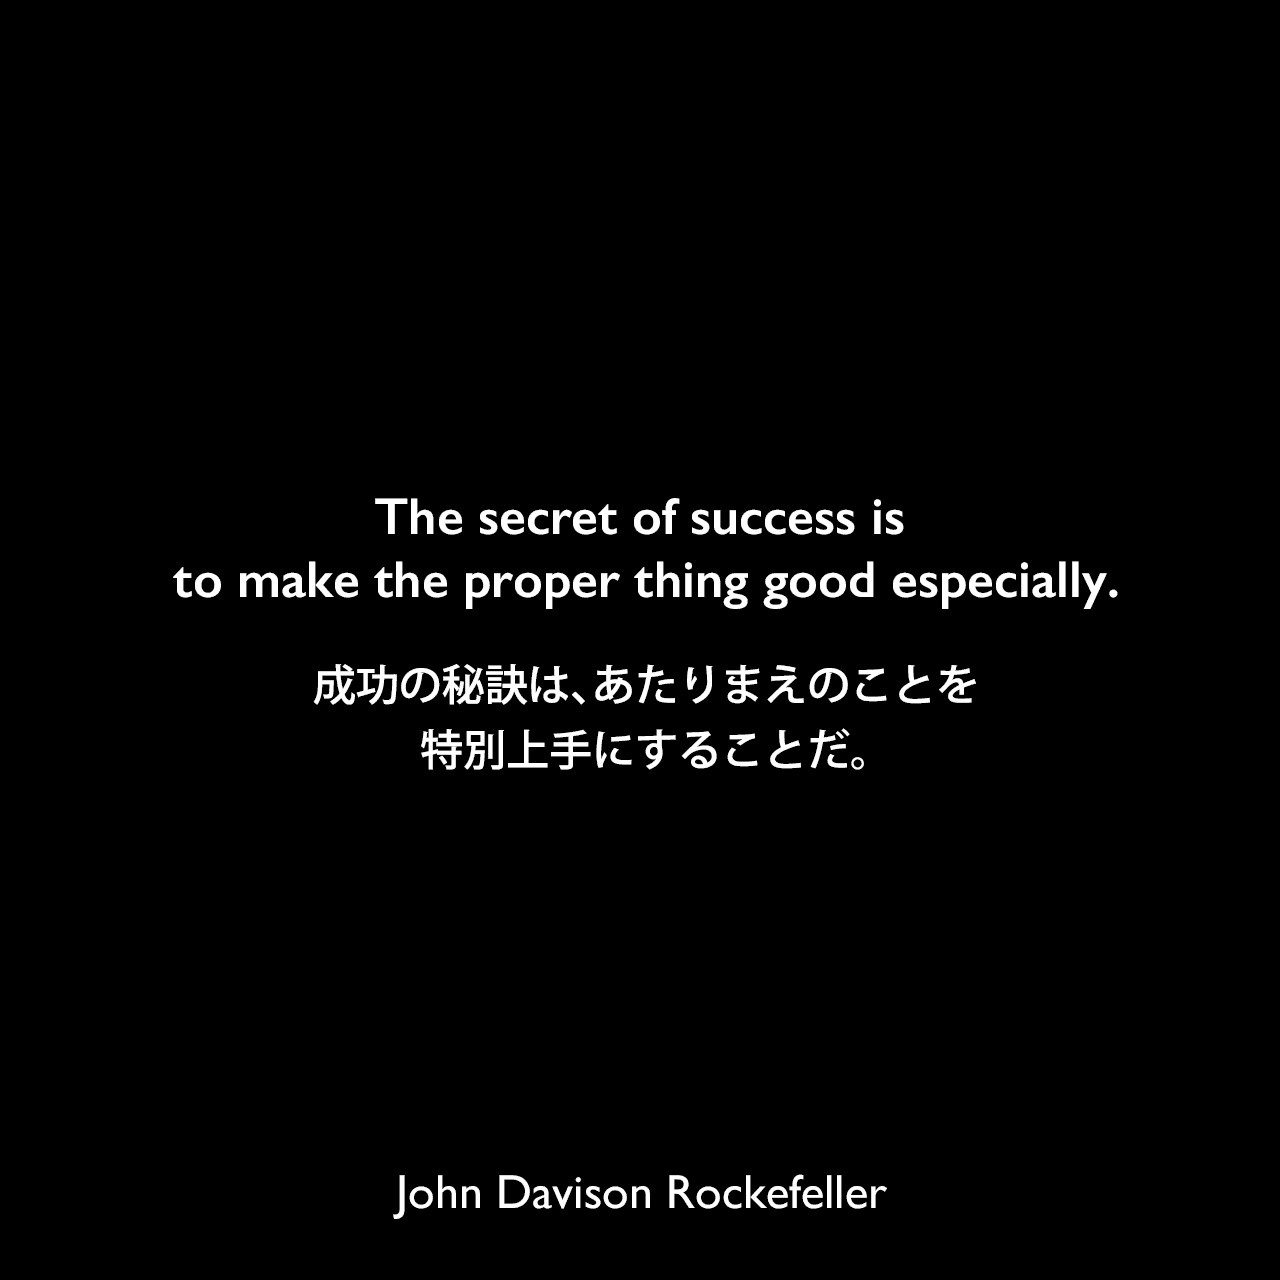 The secret of success is to make the proper thing good especially.成功の秘訣は、あたりまえのことを、特別上手にすることだ。